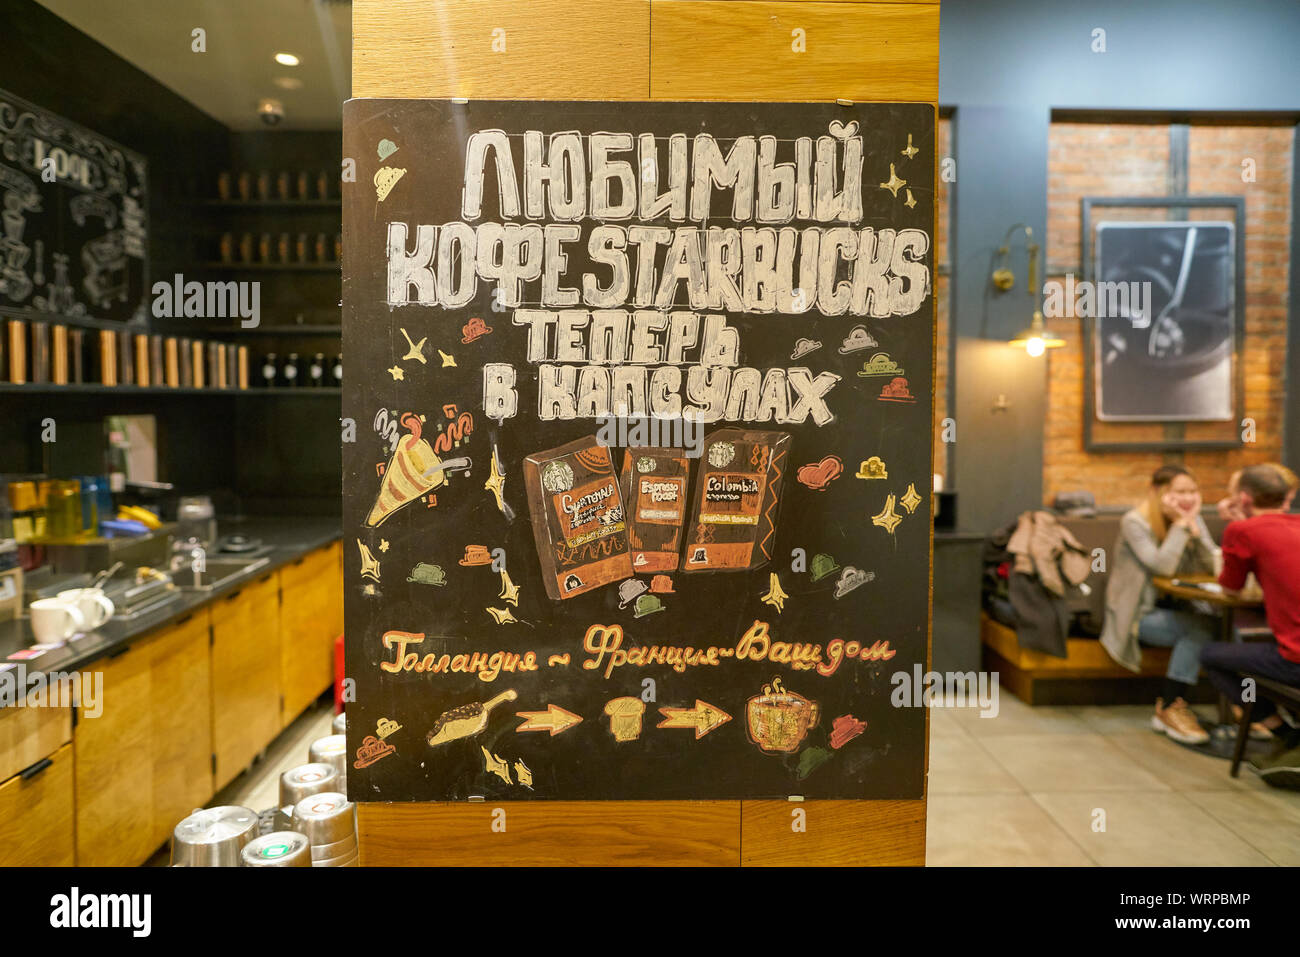 MOSCOW, RUSSIA - CIRCA OCTOBER, 2018: interior shot of Starbucks in Moscow. Stock Photo